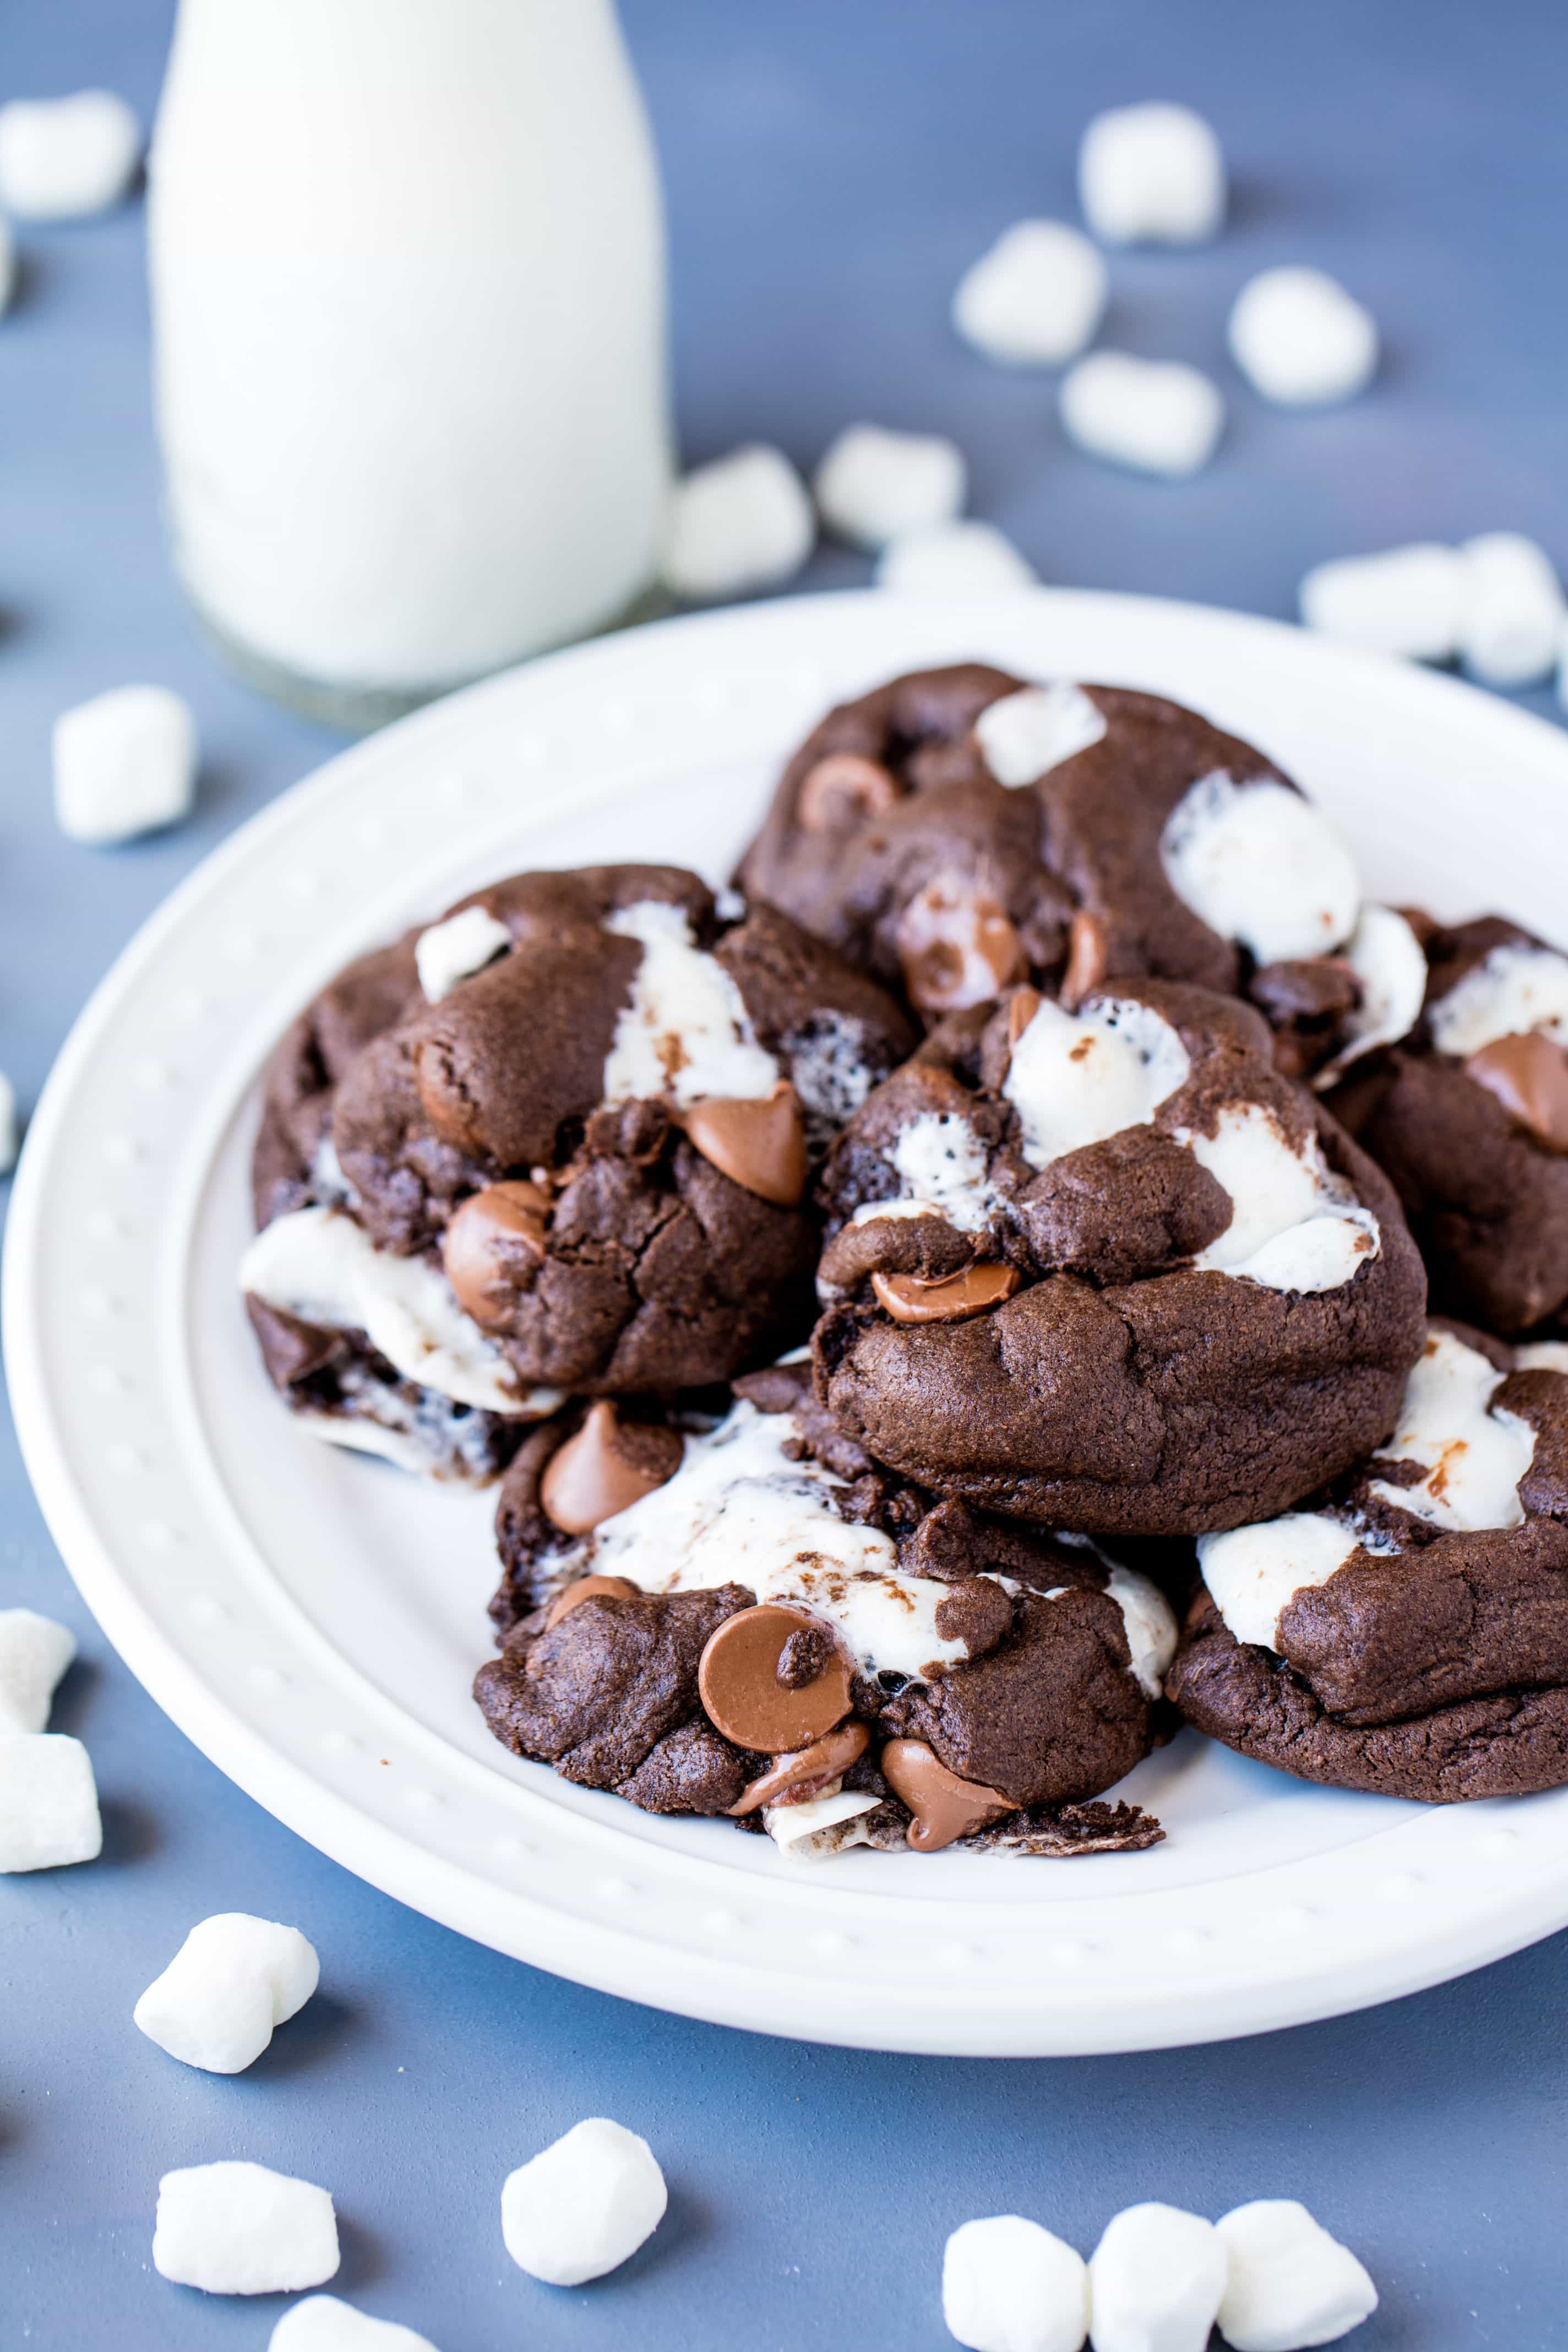 Chocolate Marshmallow Chubbies are a cross between a brownie and a cookie and are full of ooey gooey chocolate marshmallow deliciousness!